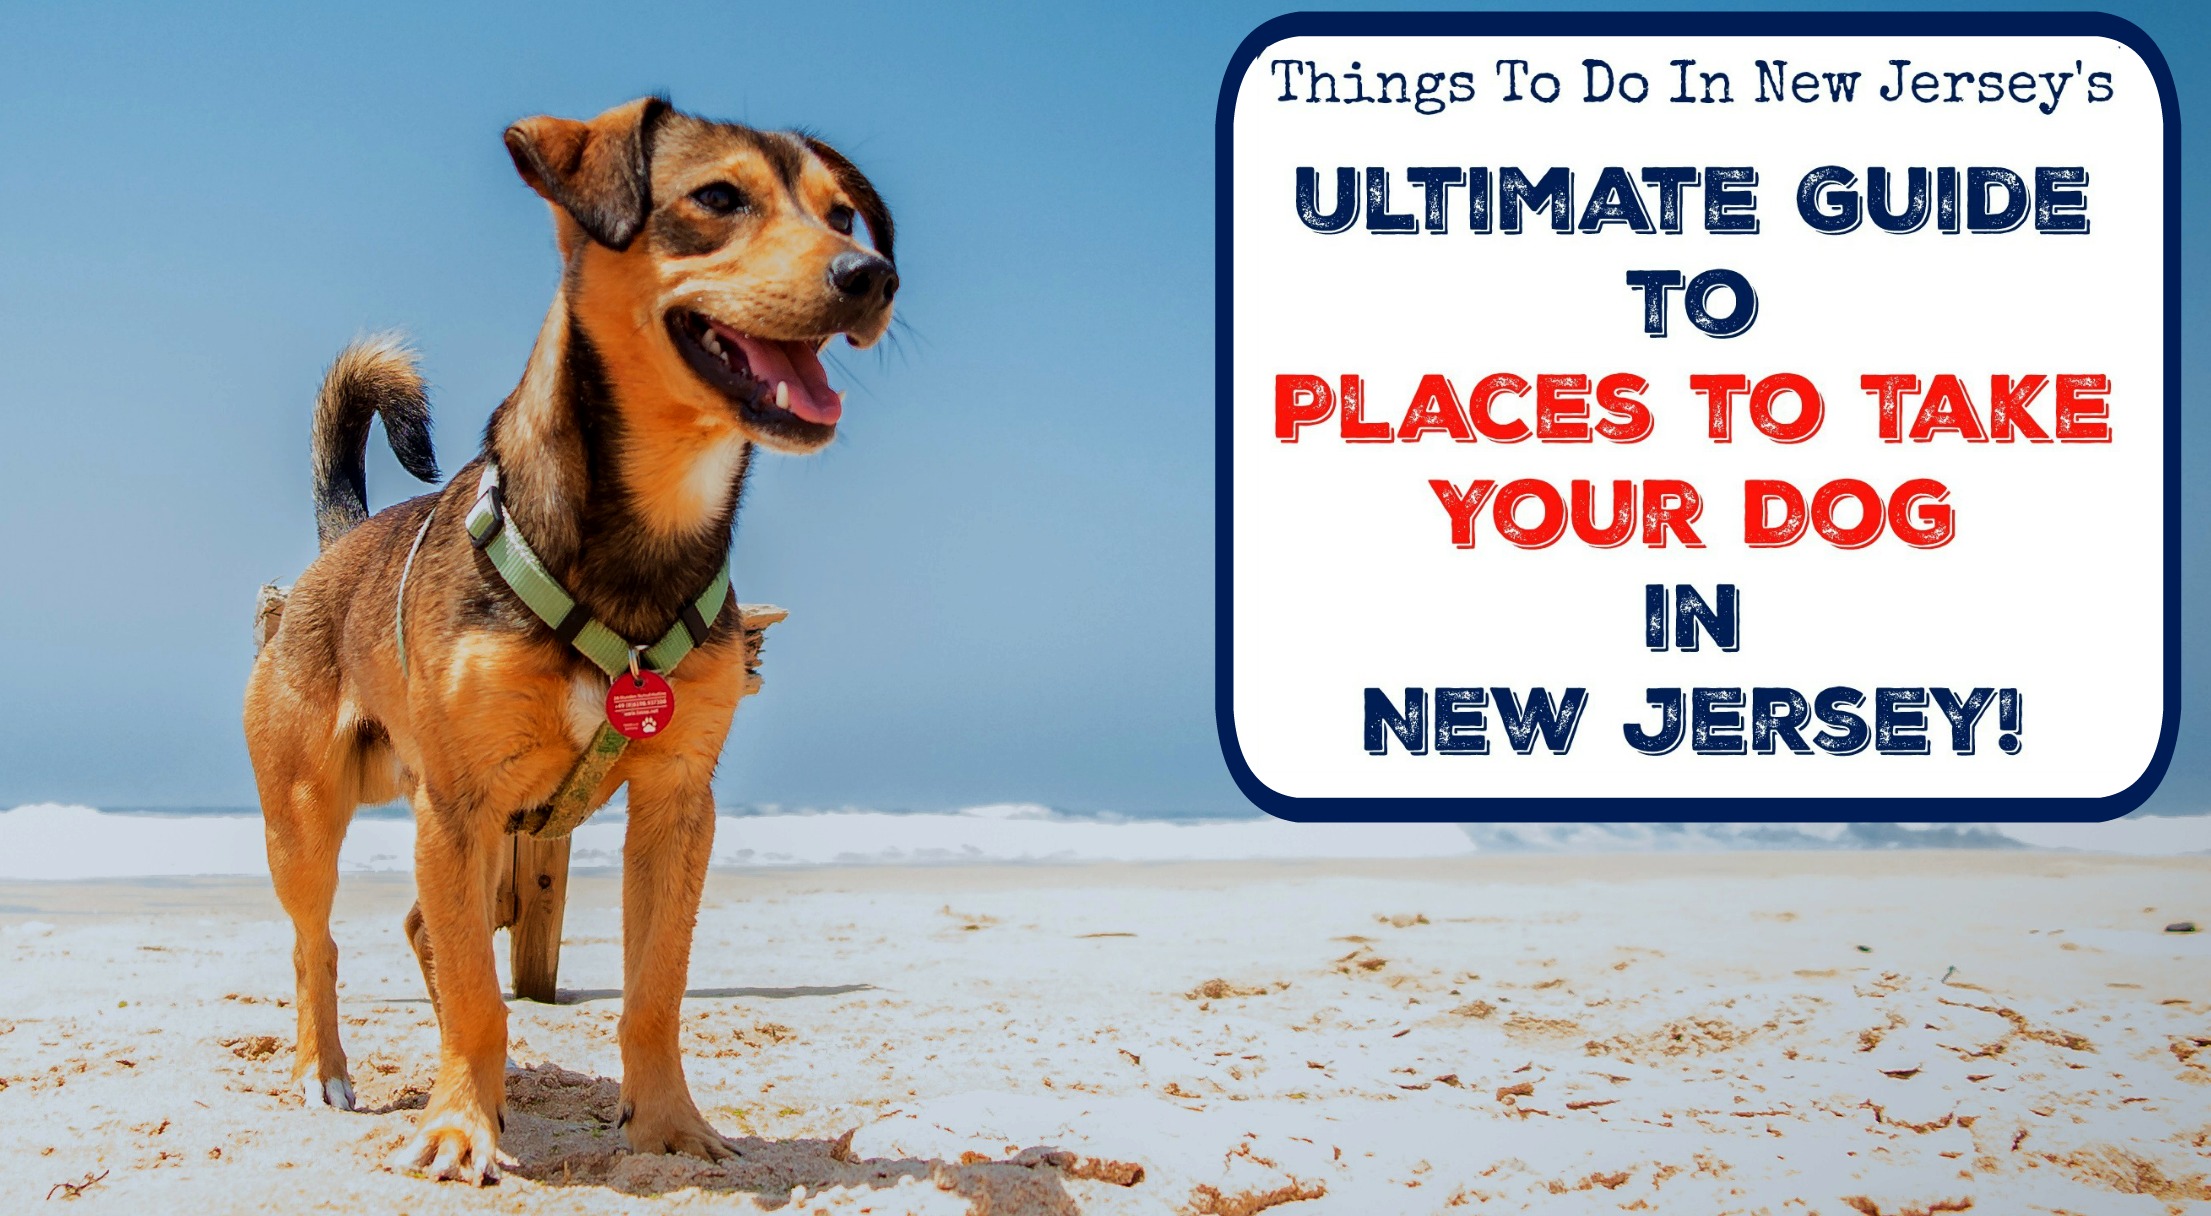 The Ultimate Guide to Places to Take Your Dog In New Jersey - Things to